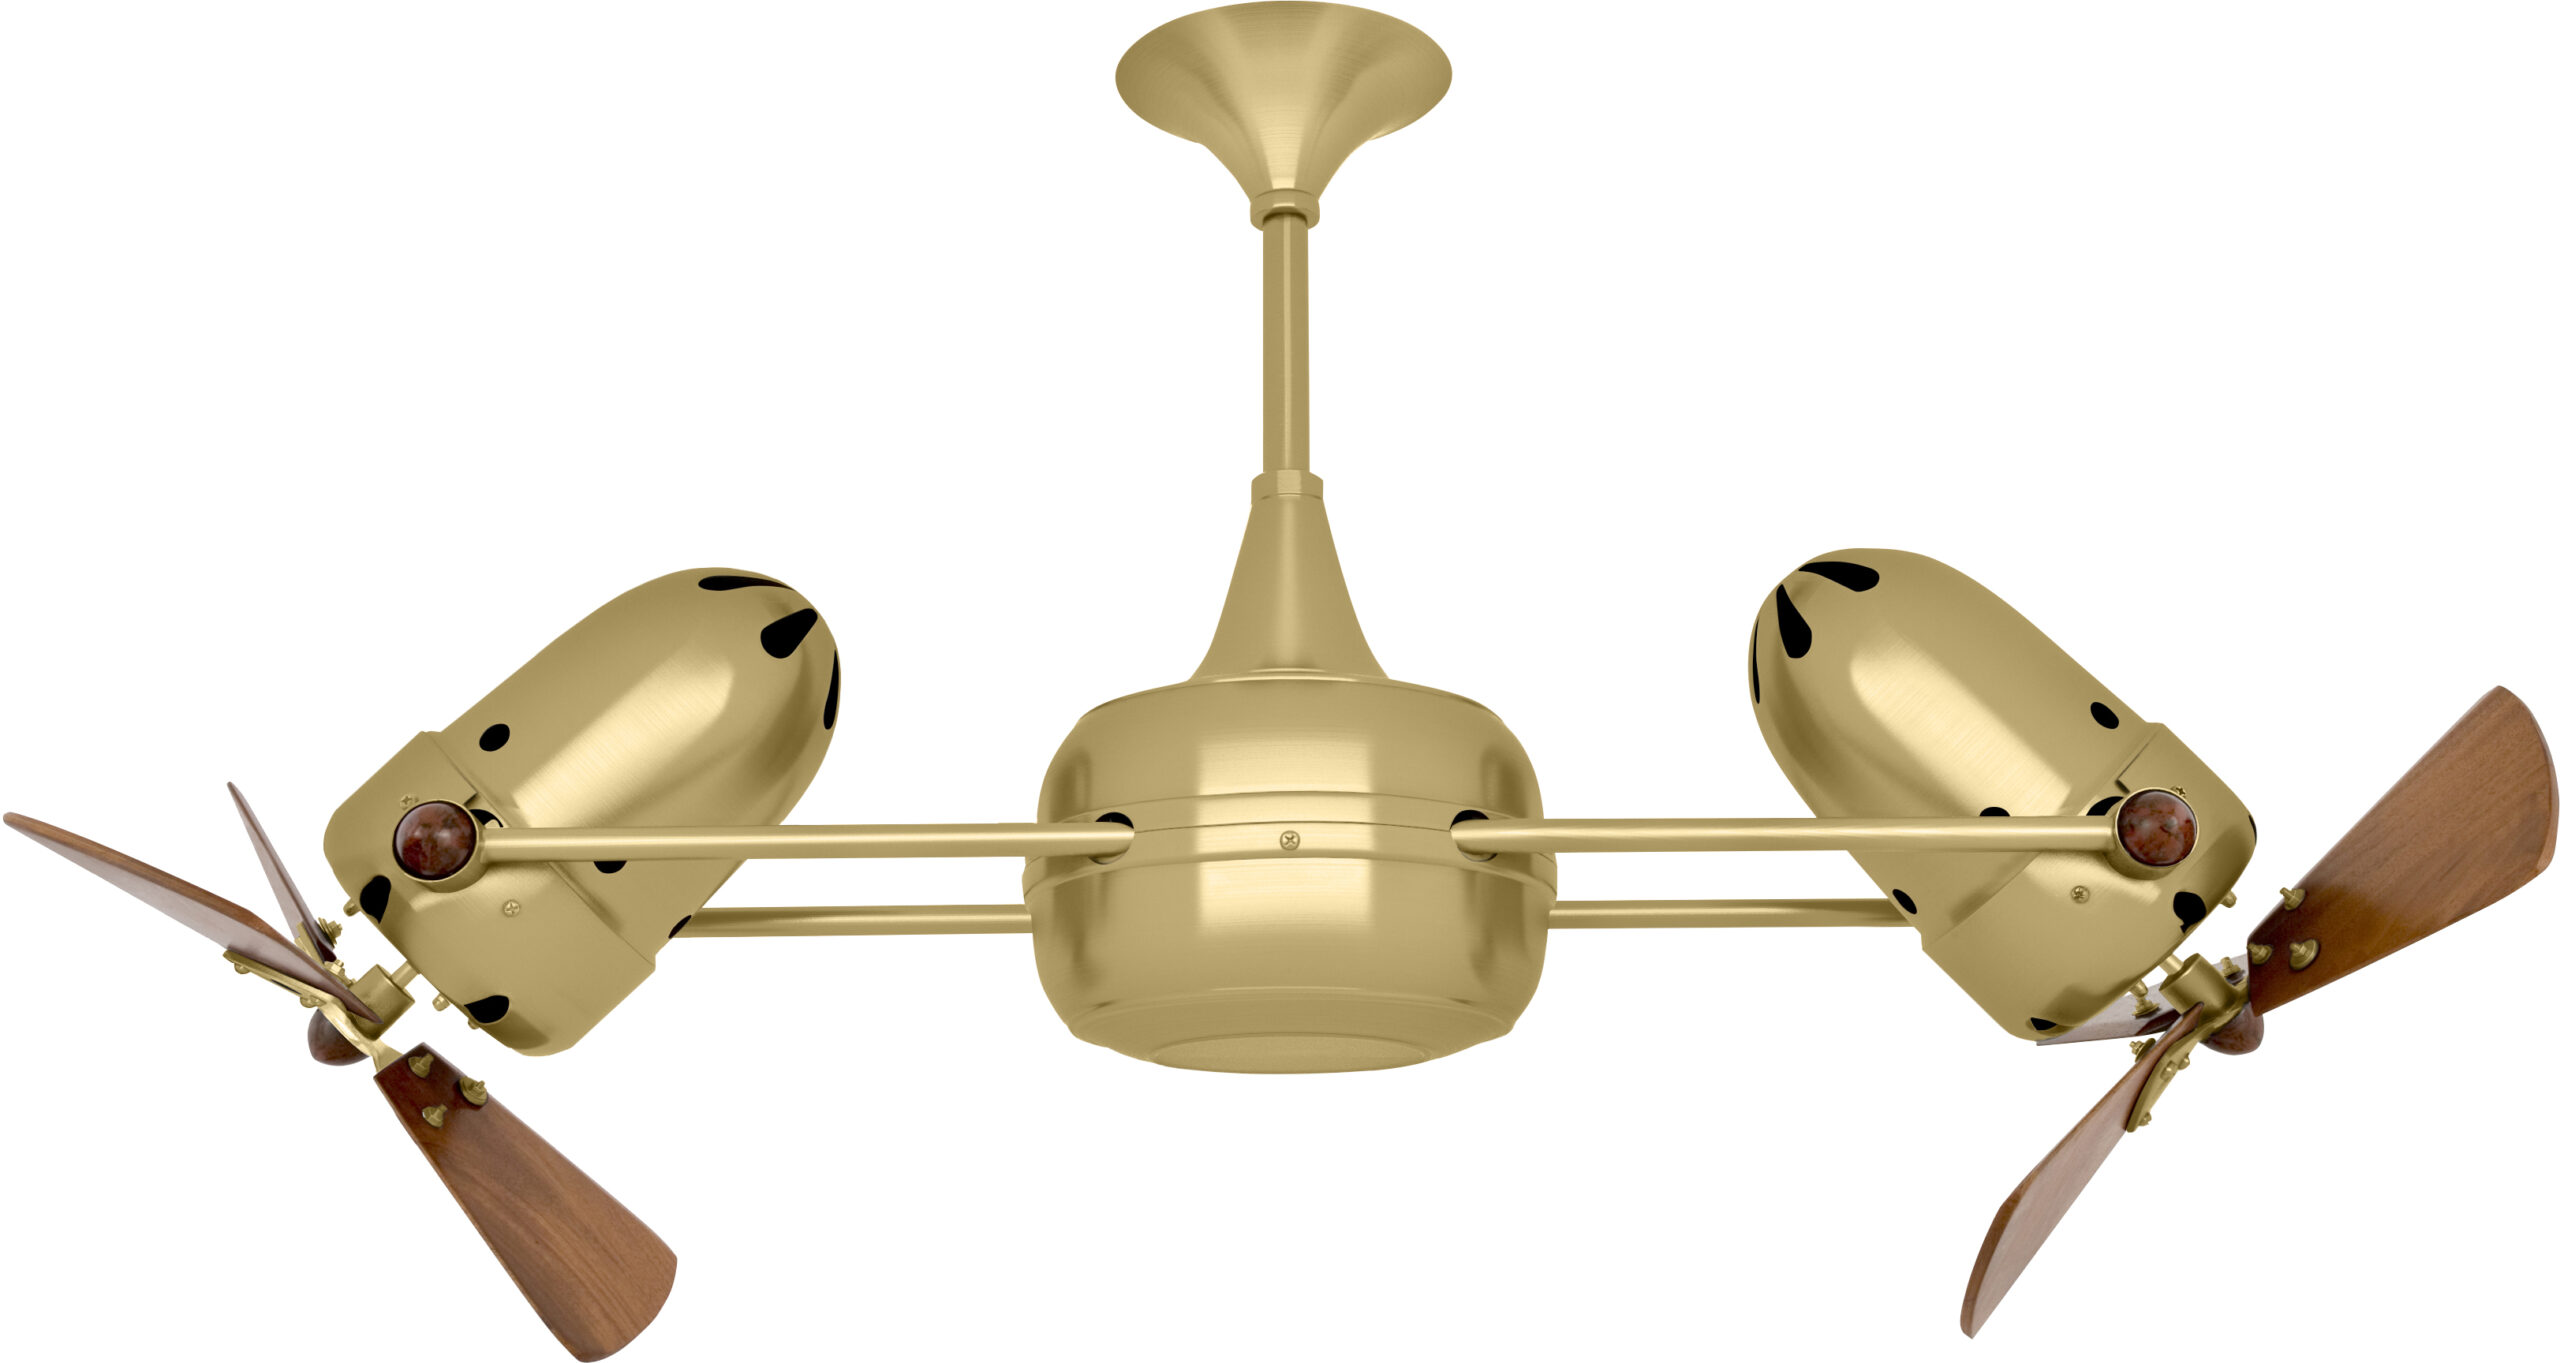 Duplo Dinamico rotational dual head ceiling fan in Brushed Brass finish with Mahogany wood blades made by Matthews Fan Company.